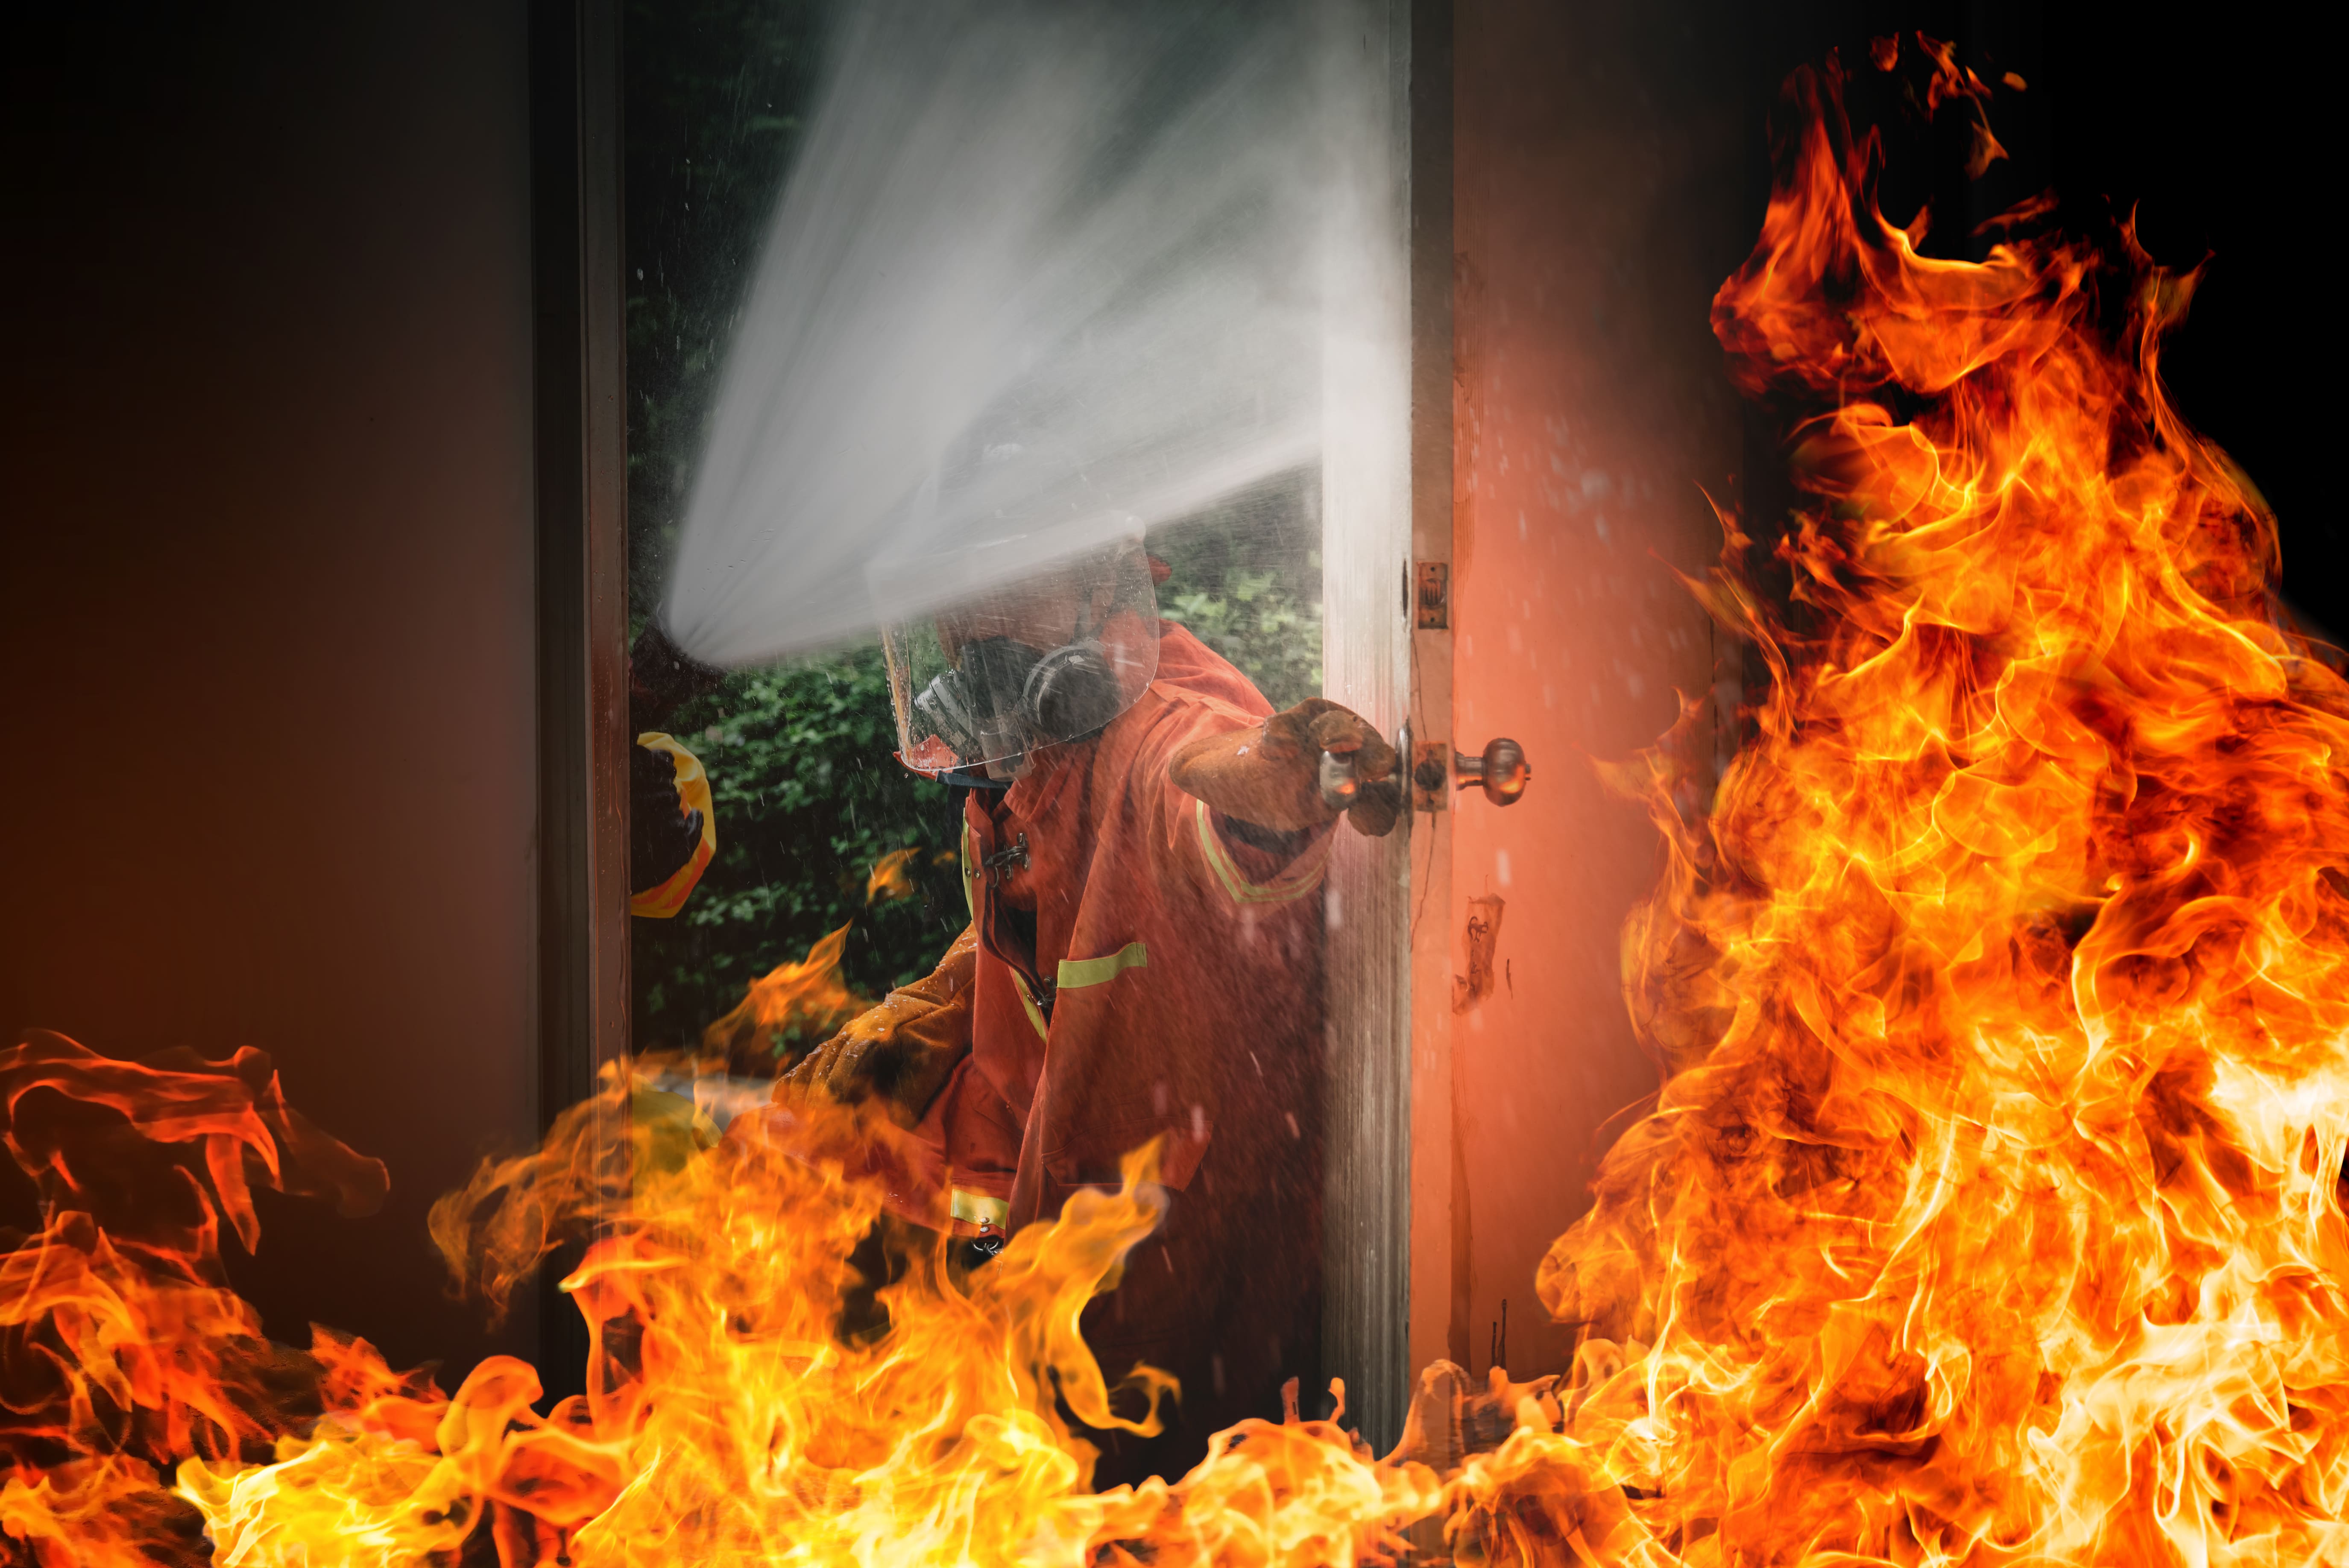 How to Avoid Fire in the House?